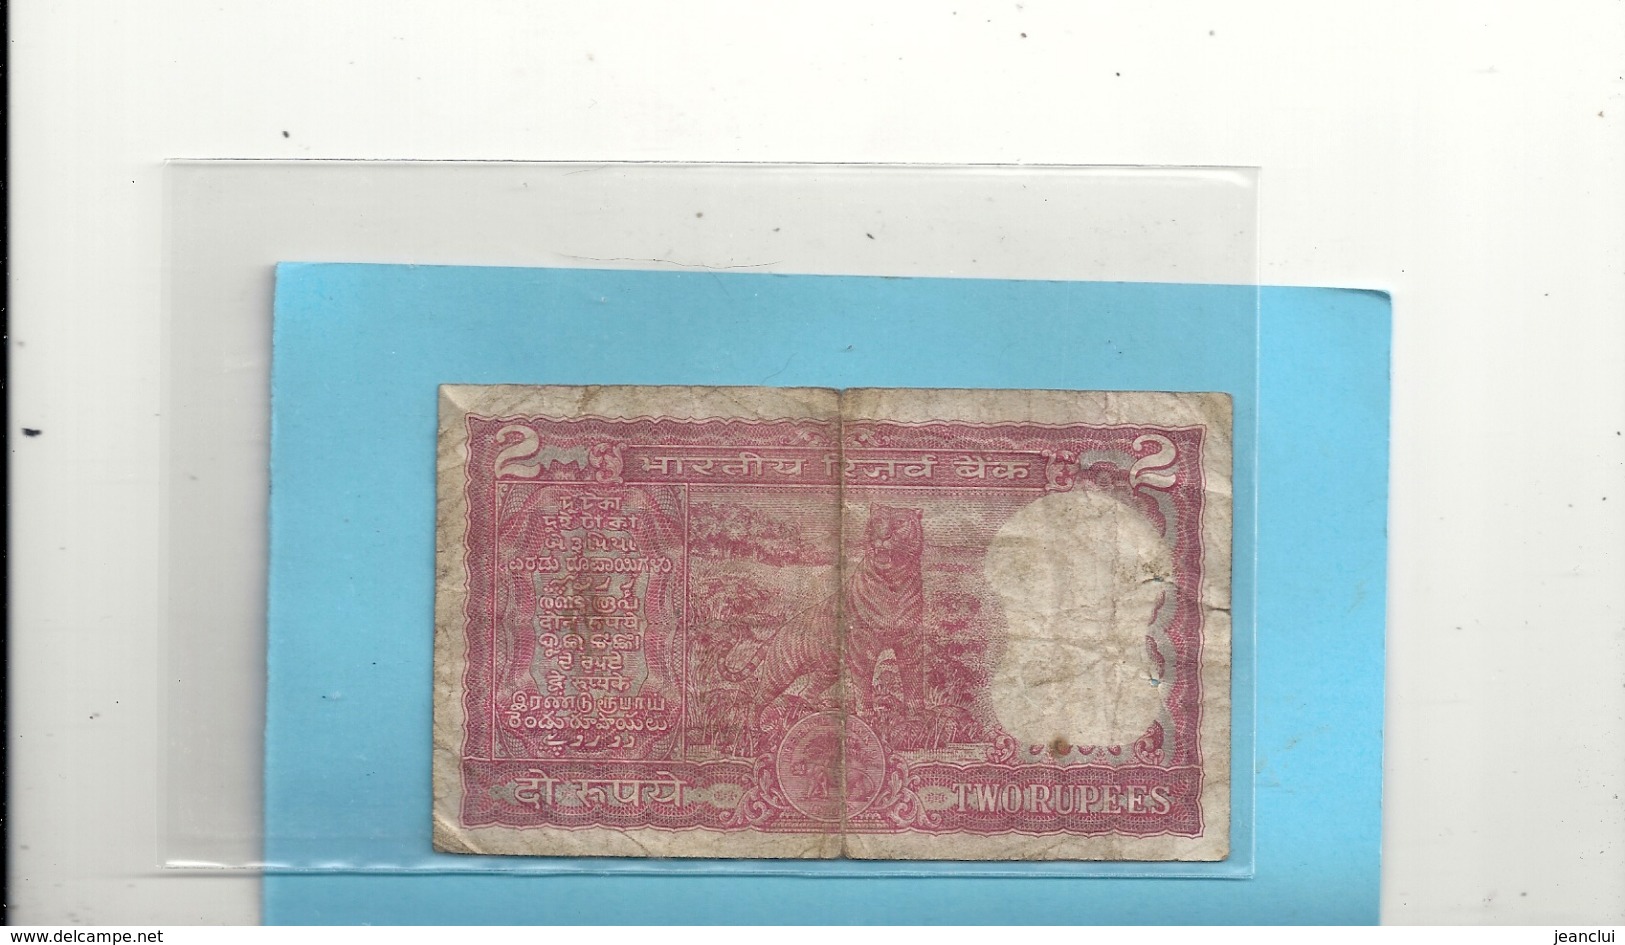 RESERVE BANK OF INDIA . 2 RUPEES . N° Q/25 J 70197 .CORRECTED TO URDU ( No Persian ) - Inde